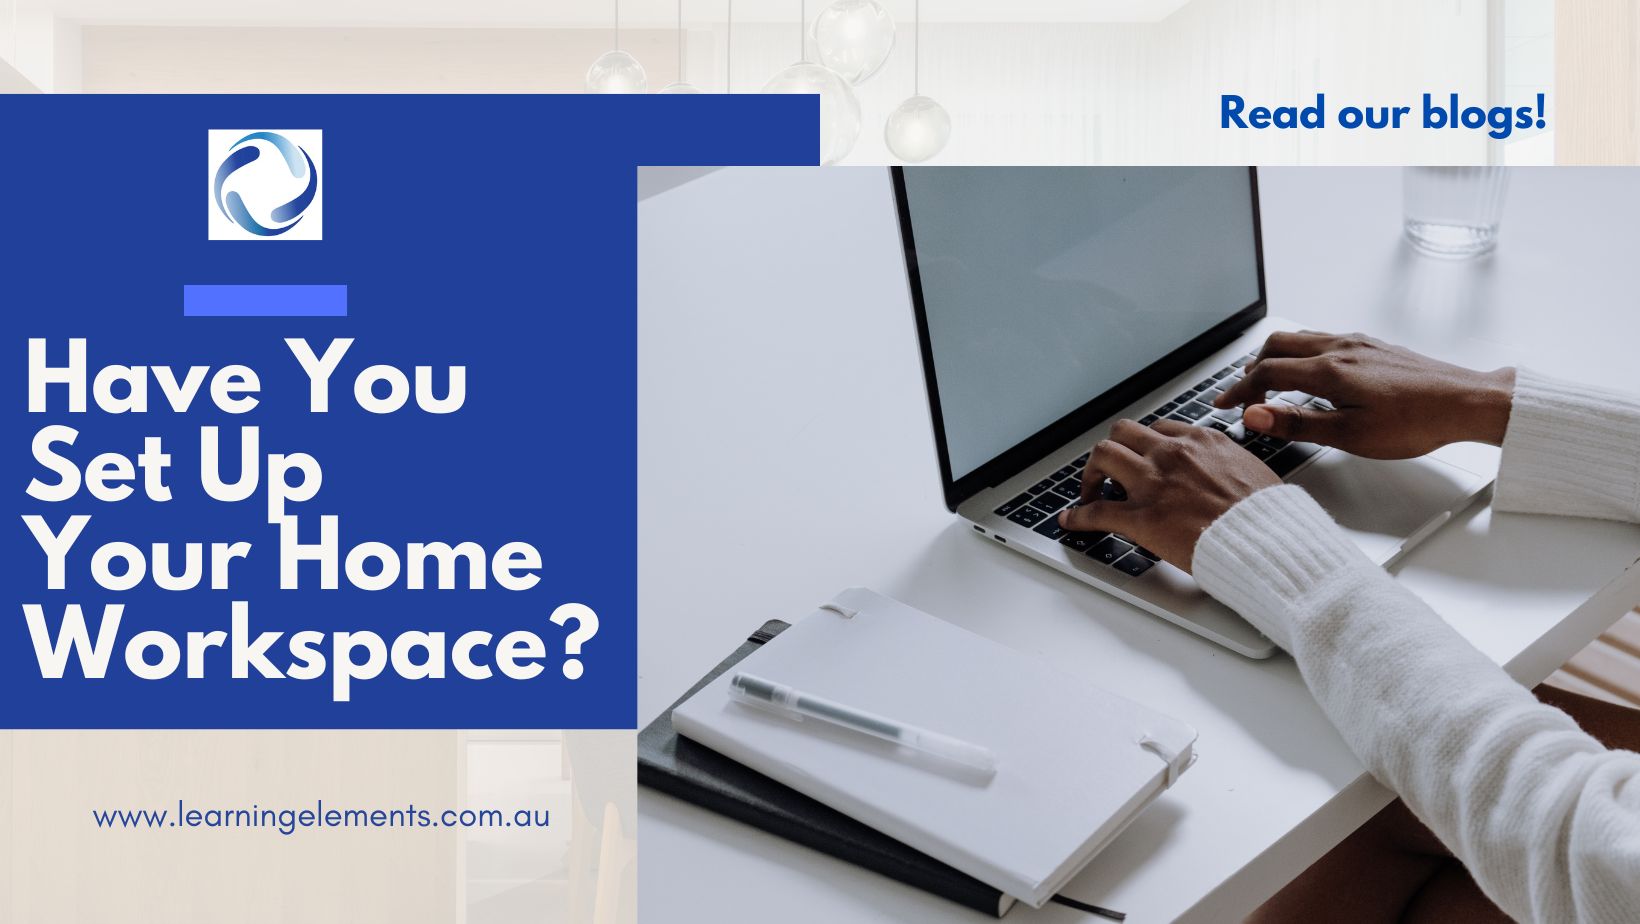 Have You Set Up Your Home Workspace